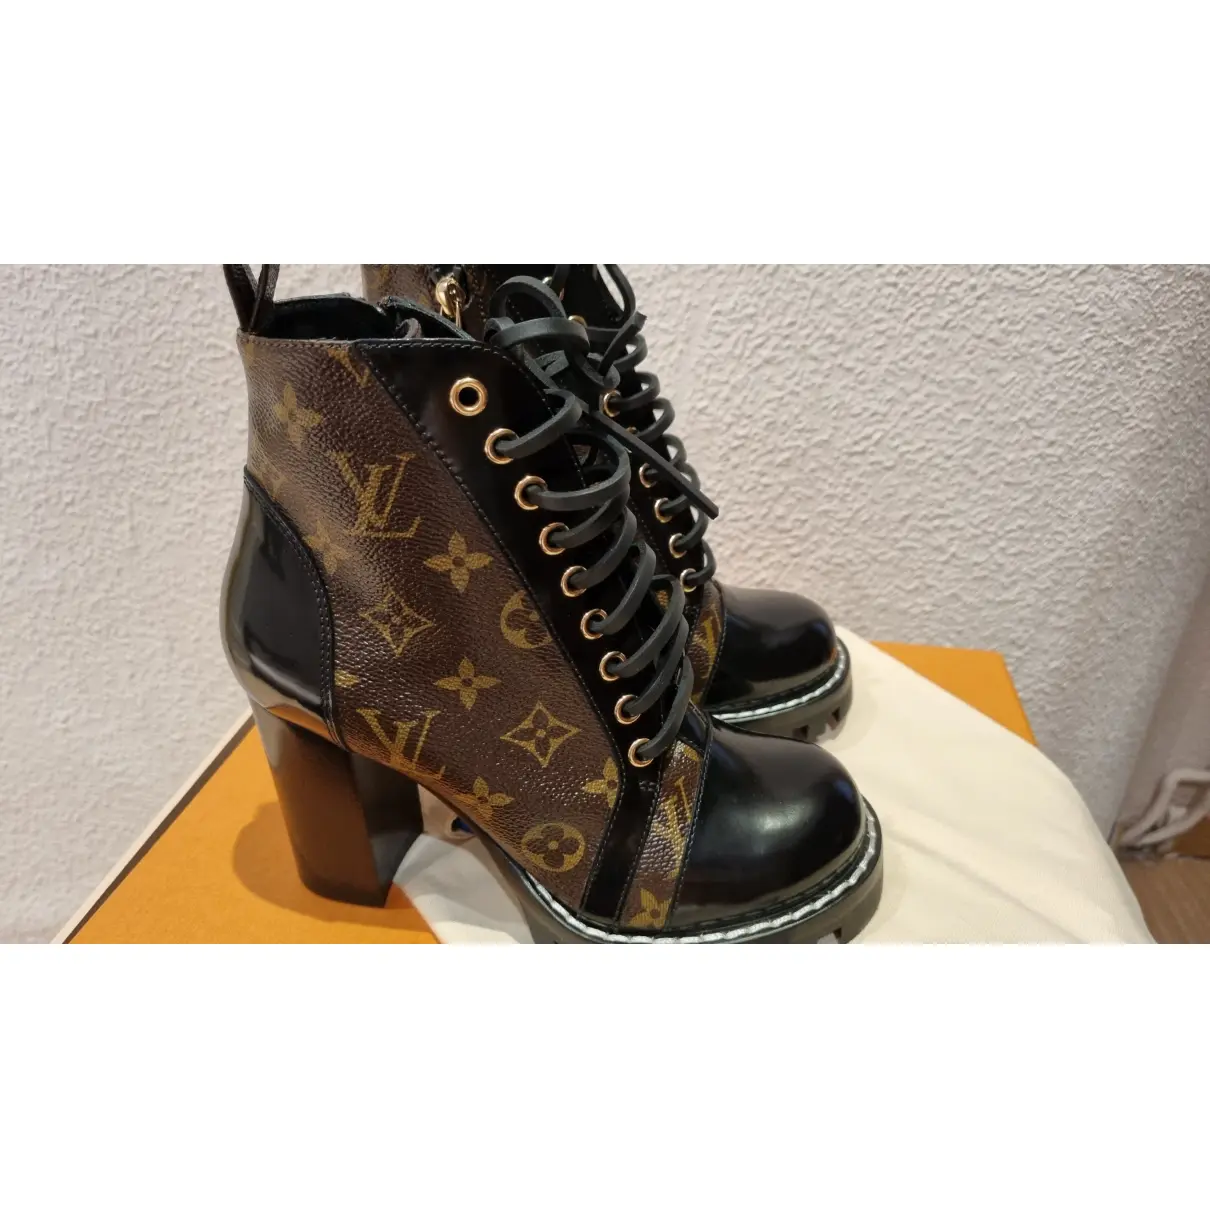 Buy Louis Vuitton Star Trail leather ankle boots online